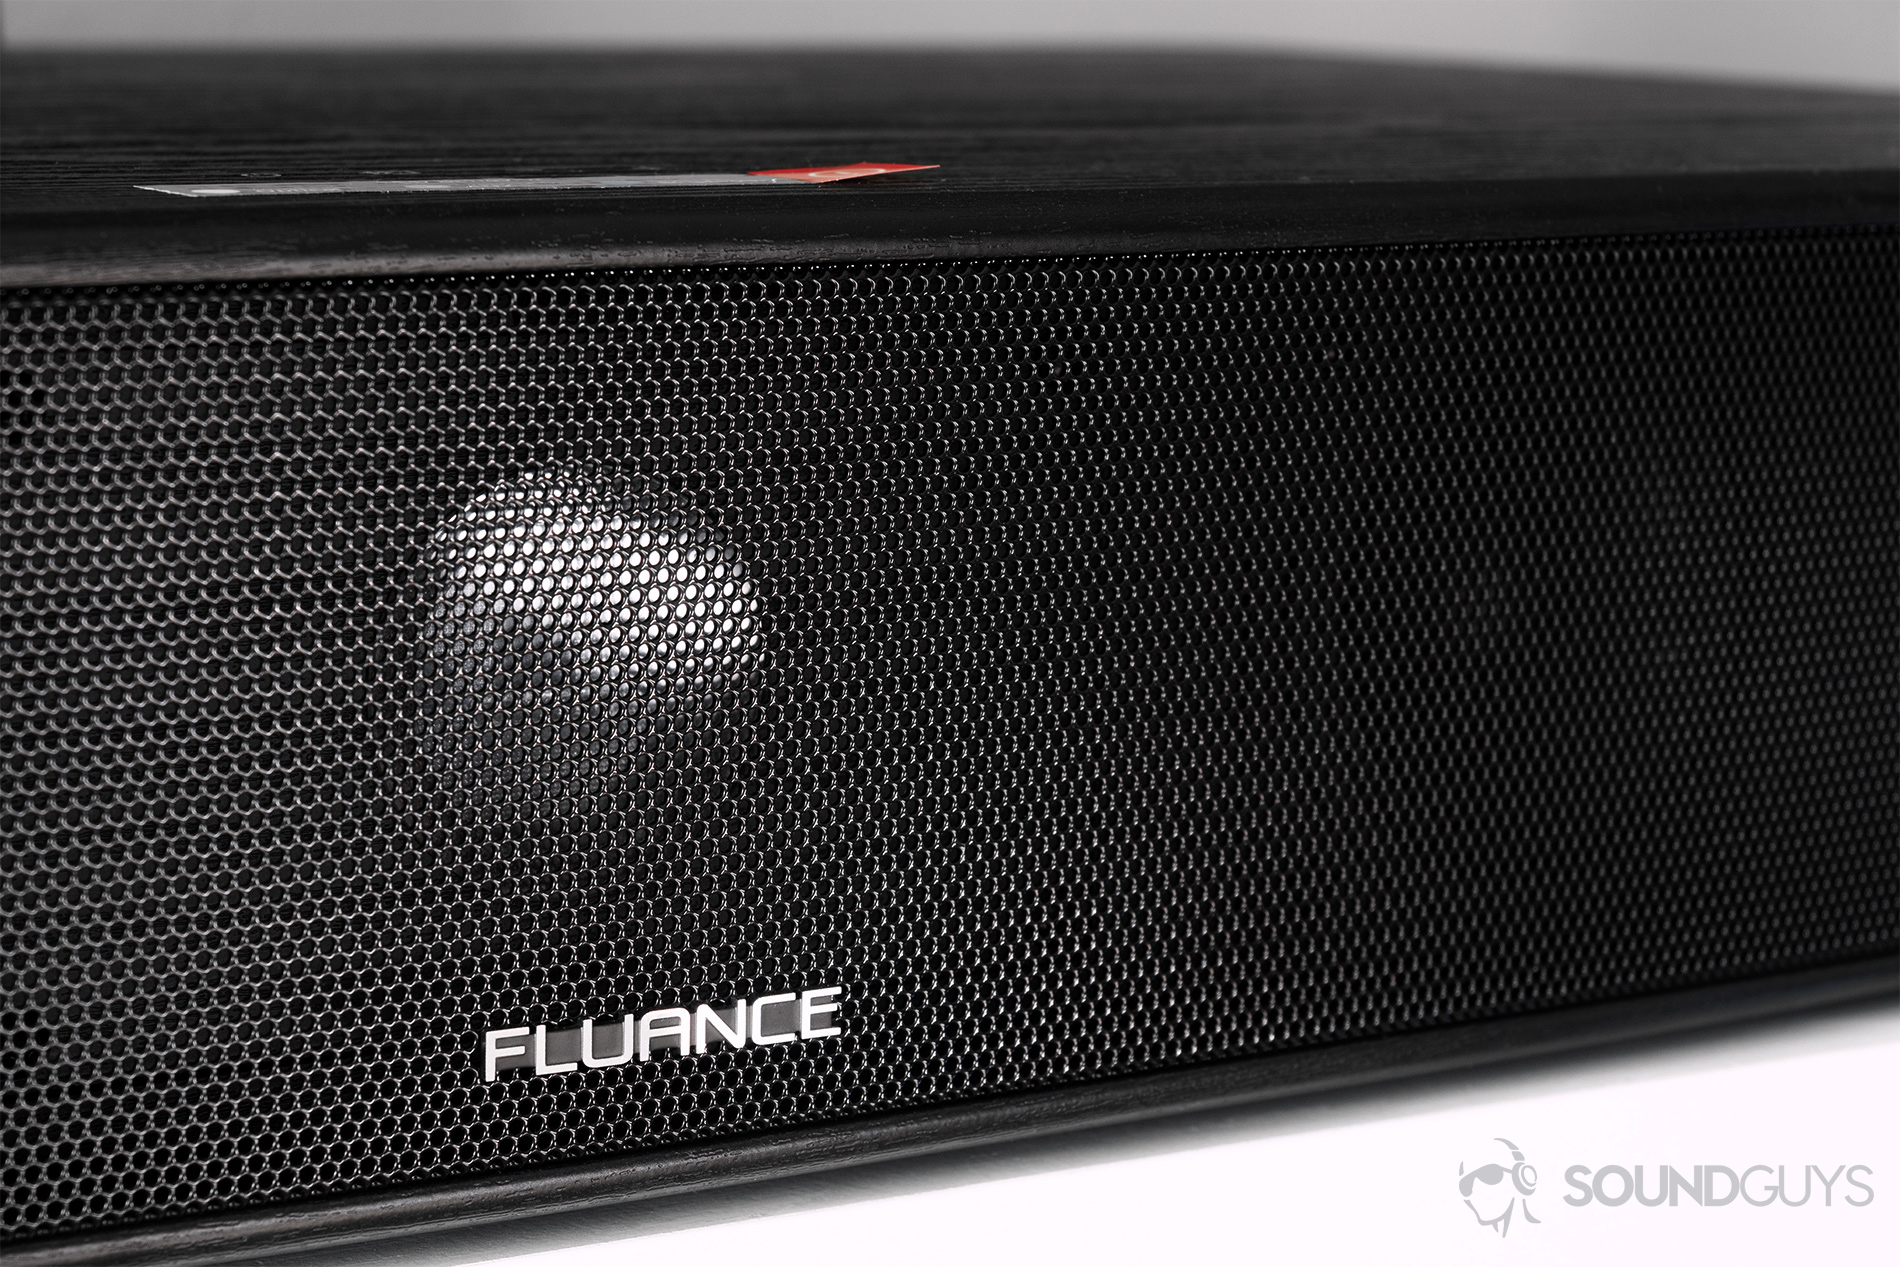 Fluance AB40 review: A close-up of the speaker and one of the front-facing drivers.